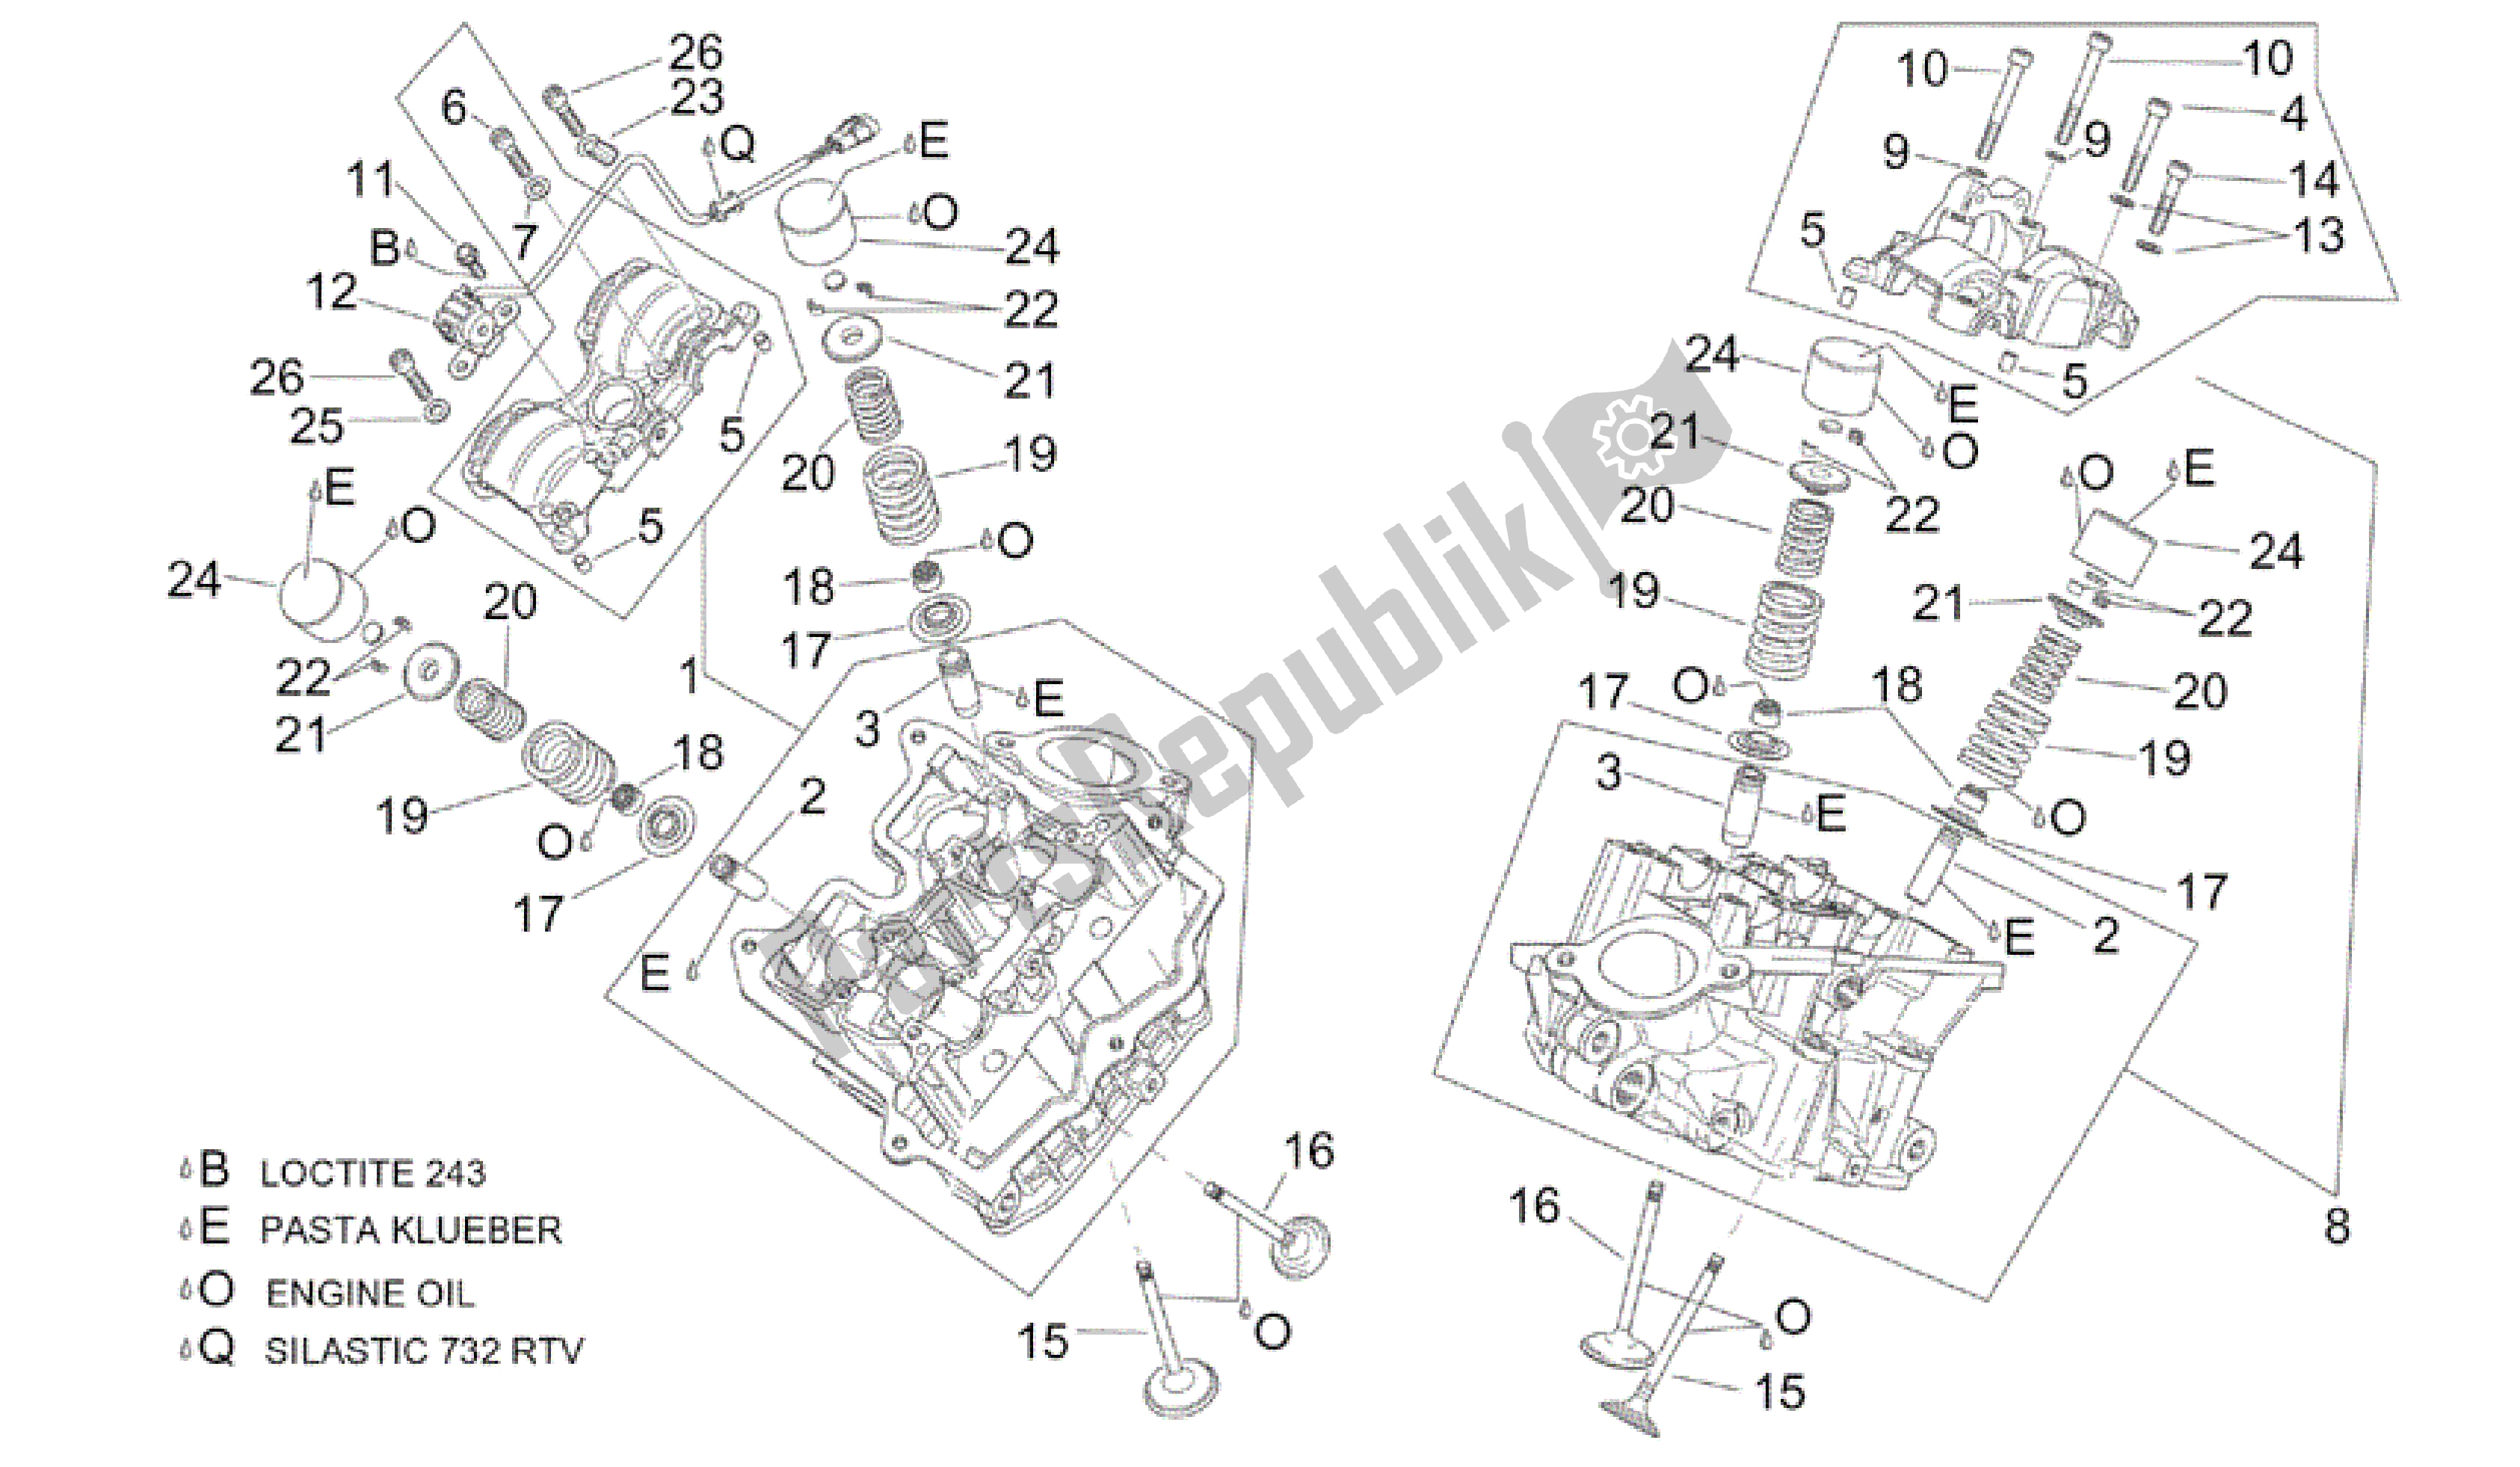 All parts for the Cylinder Head And Valves of the Aprilia RSV Tuono R Factory 1000 2004 - 2005